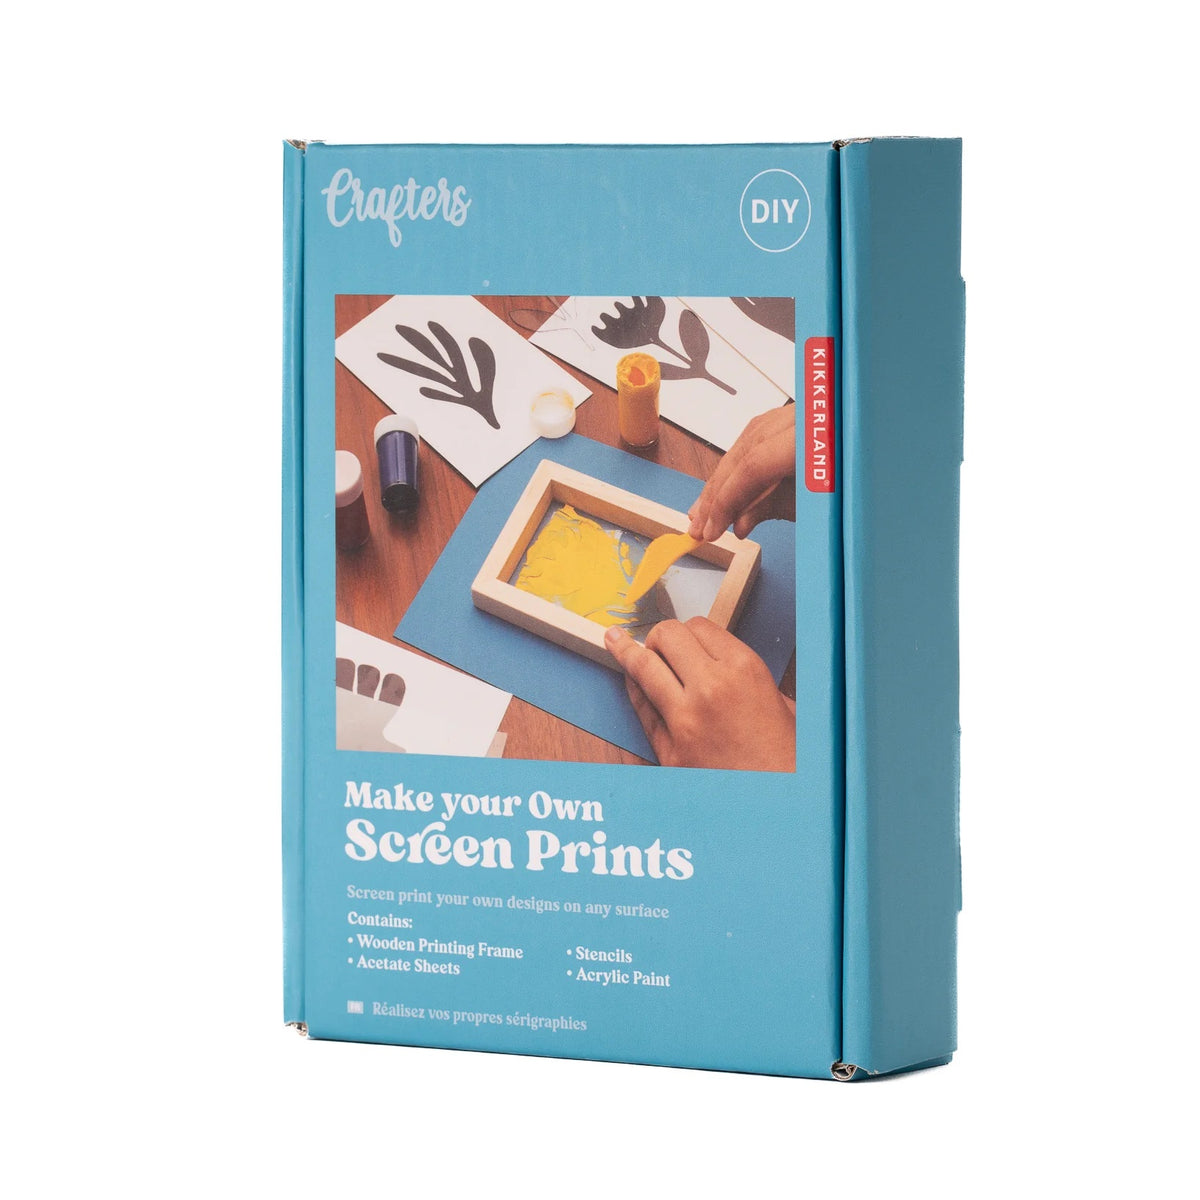 Crafters Make Your Own Screen Prints